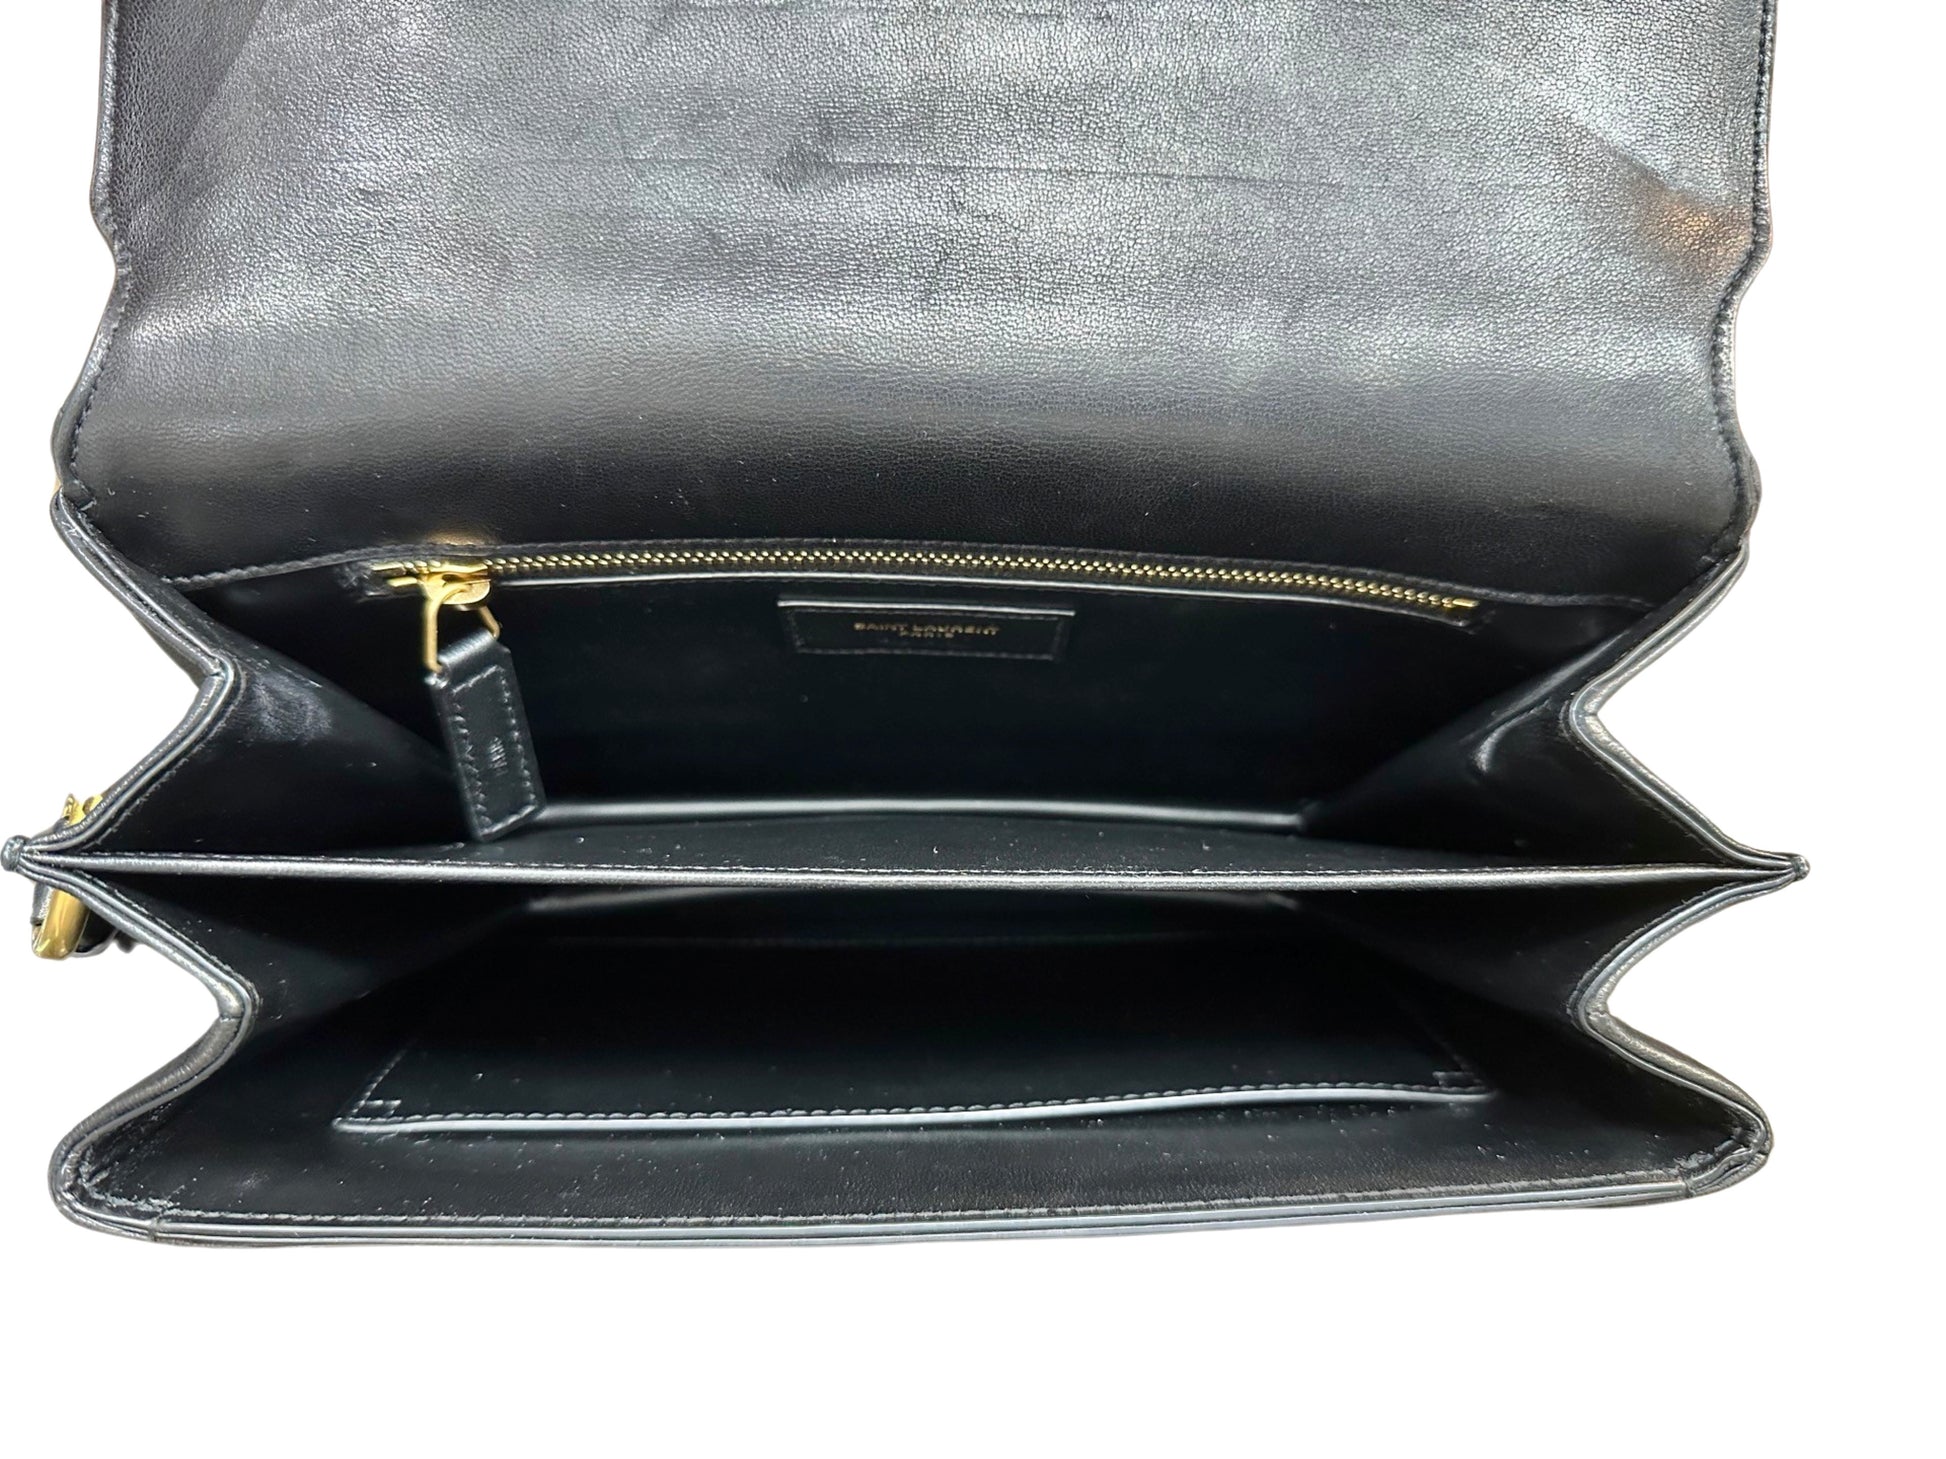 Top of bag with flap open showing interior. Scuff marks on the inside of the flap